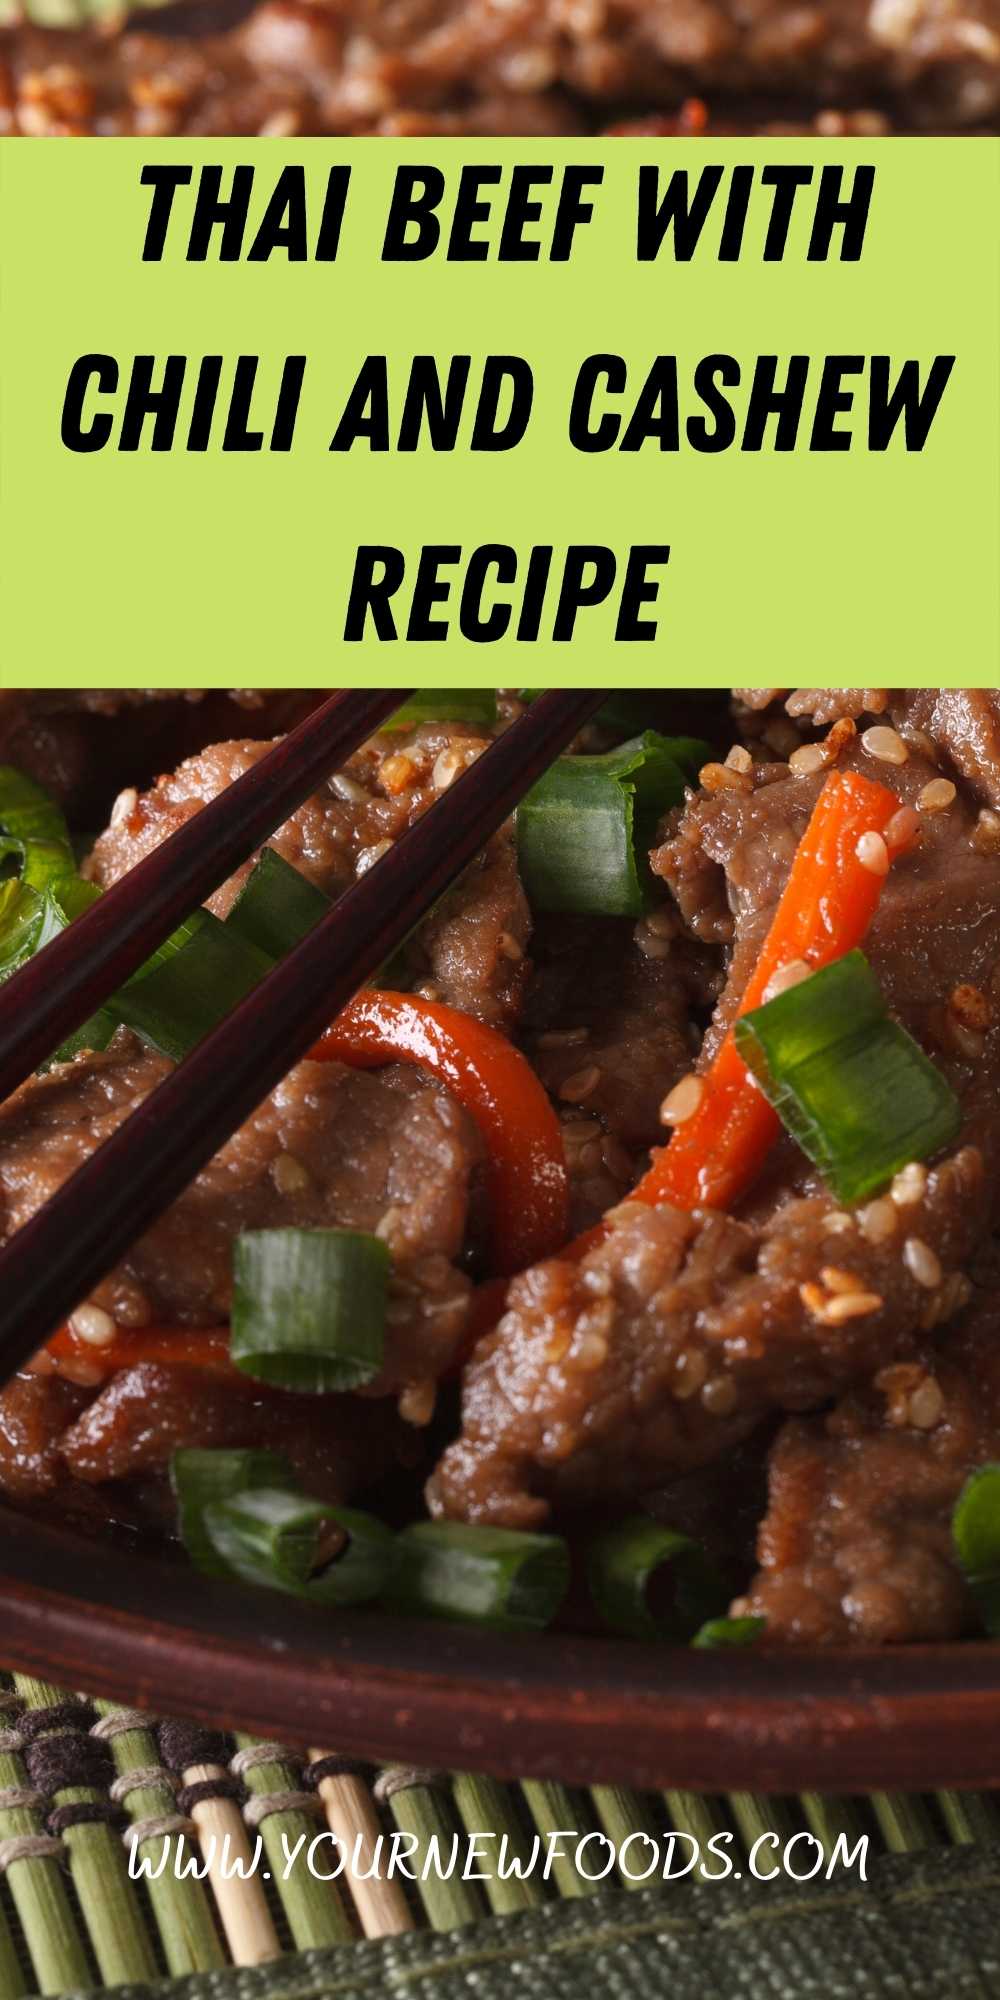 Thai beef with chili and cashew Recipe